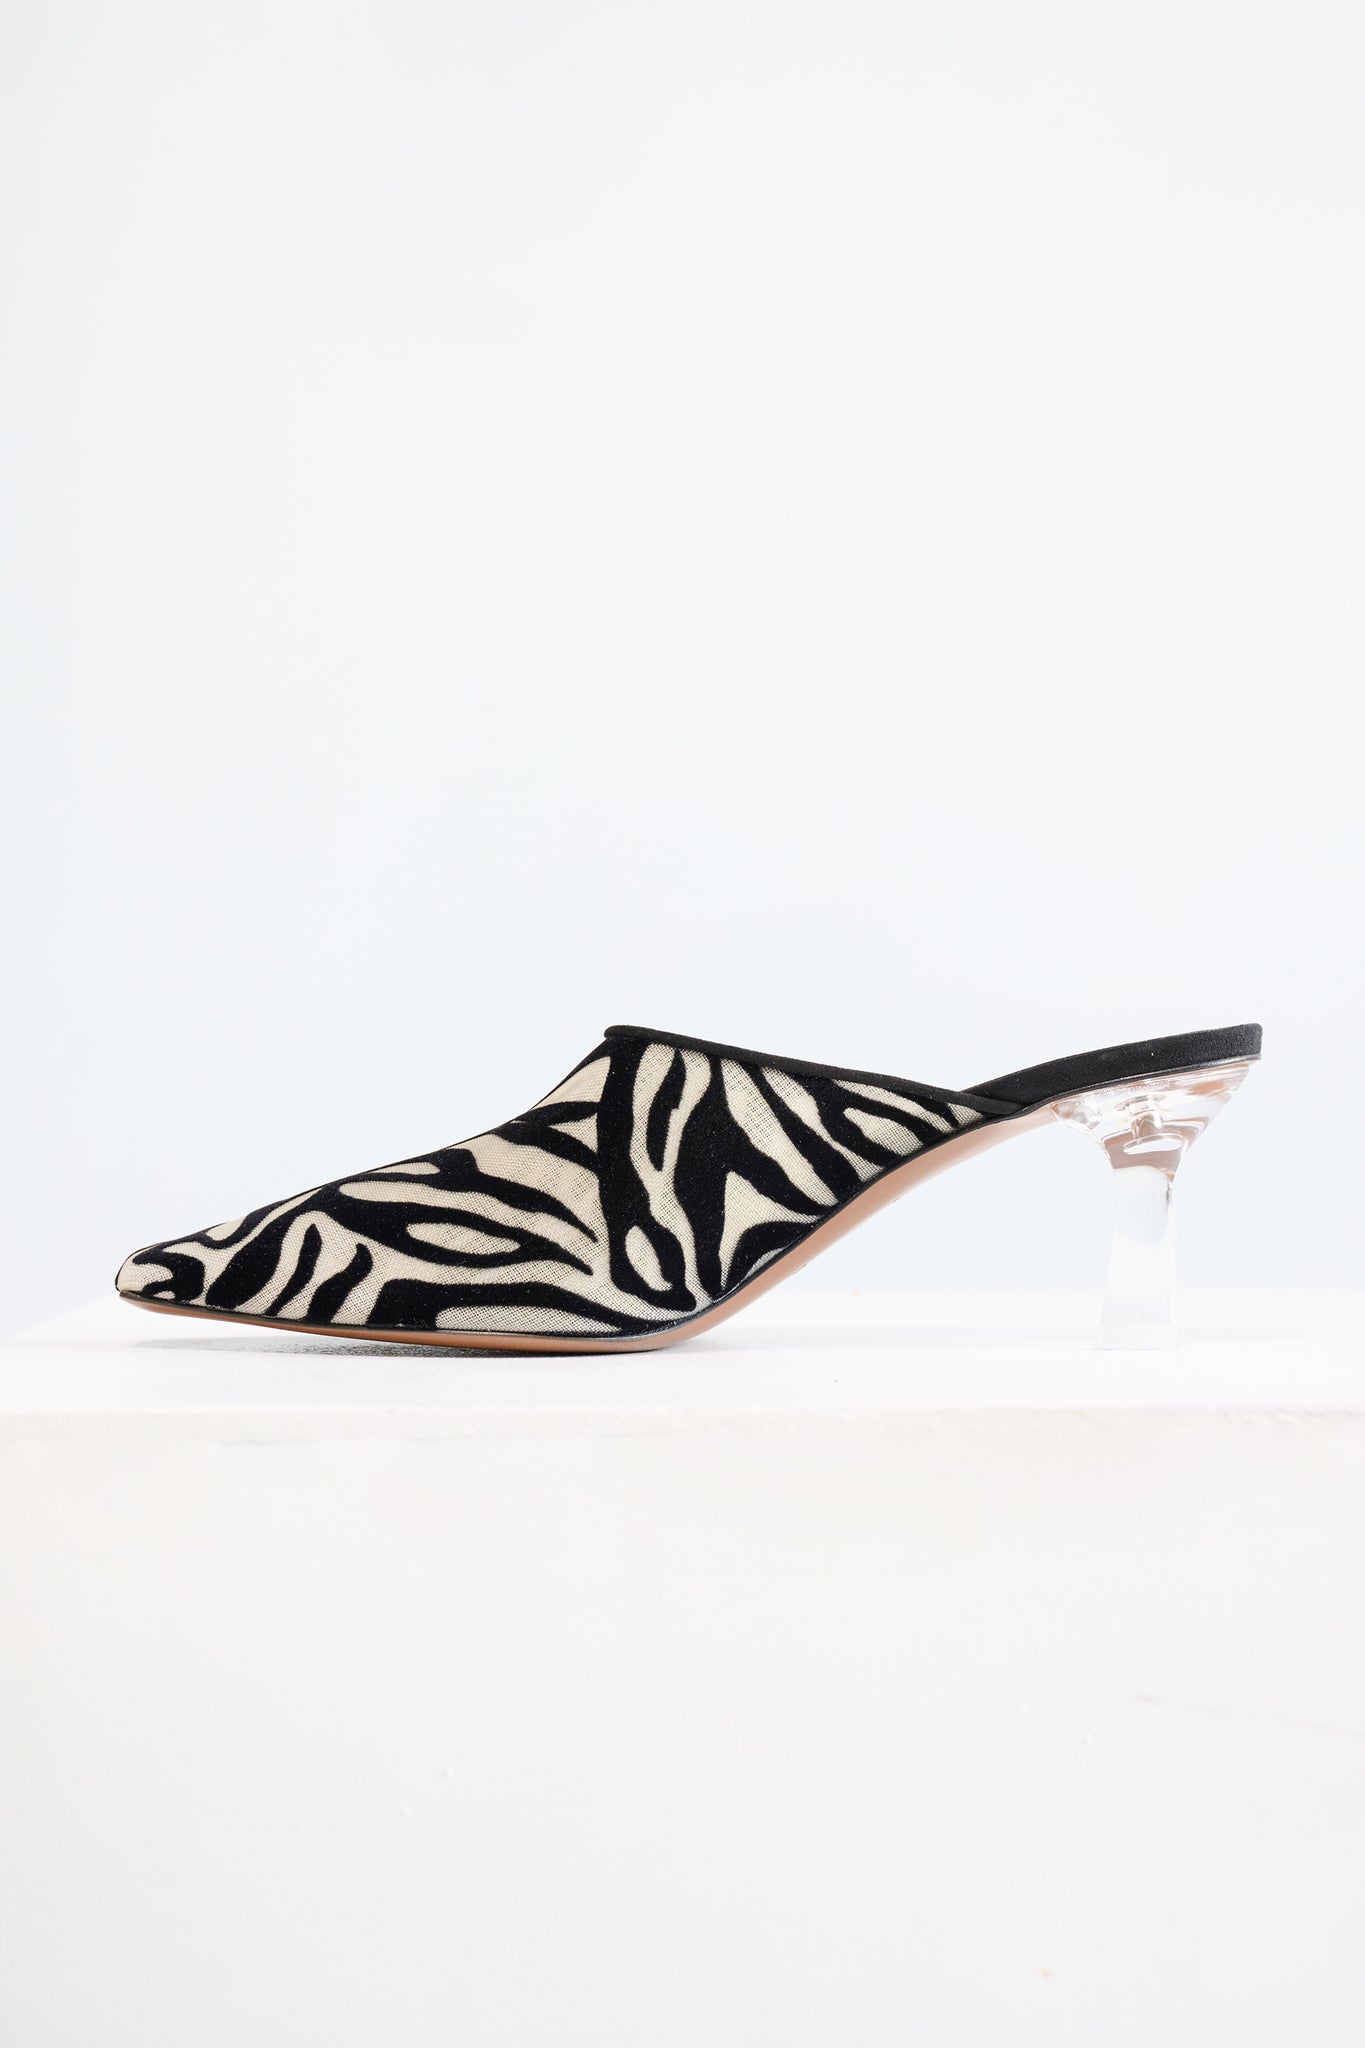 NEOUS - Electra Mule, Black and Cream